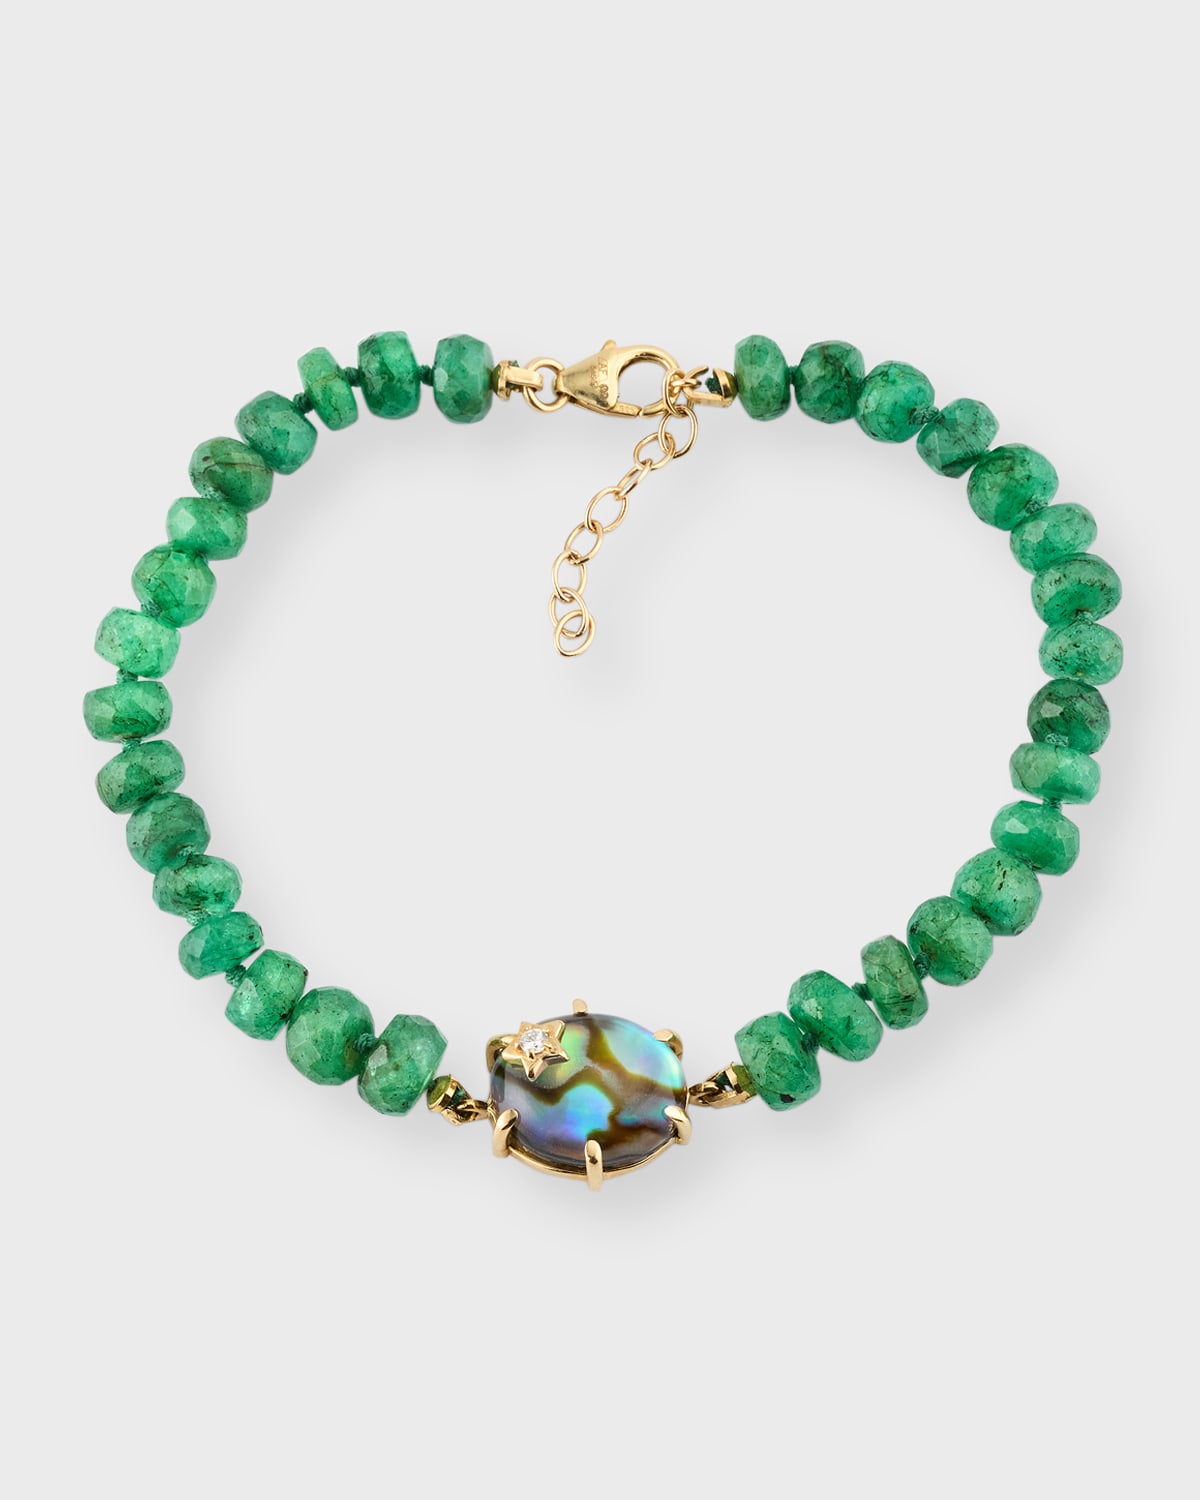 14K Yellow Gold Mini Glaxay Mother-Of-Pearl and Emerald Beaded Bracelet